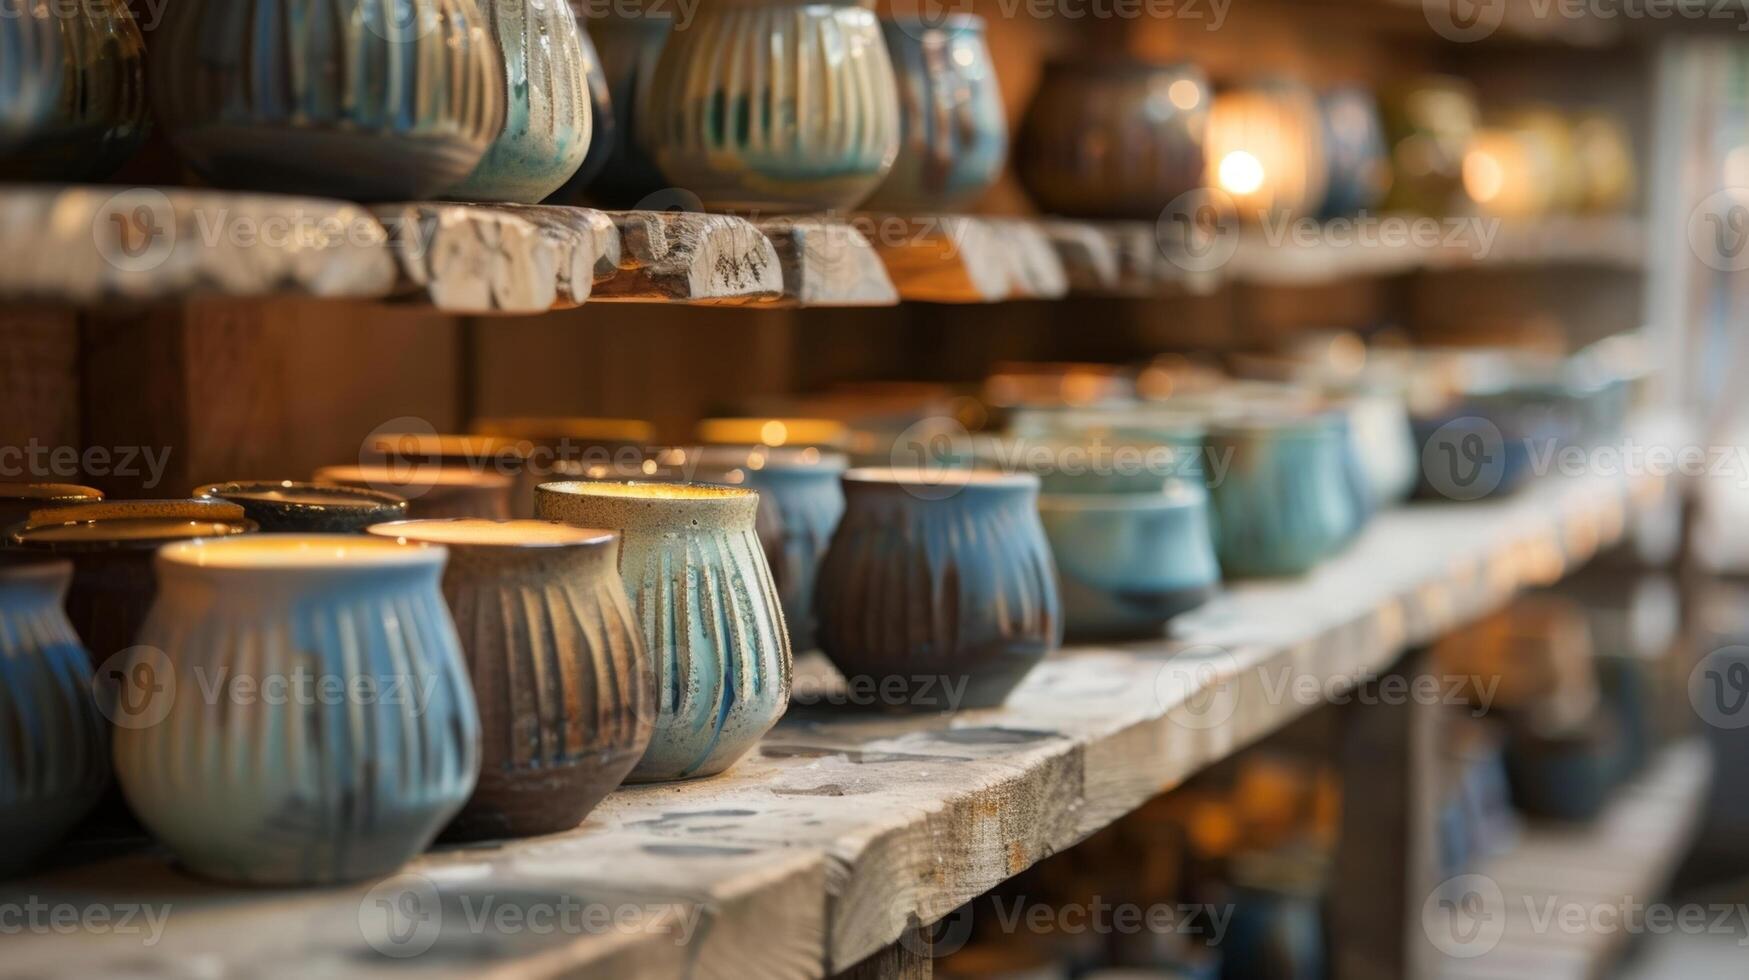 A set of delicate ceramic lampshades carefully p in a kiln their glossy glazes glistening in the soft light. photo